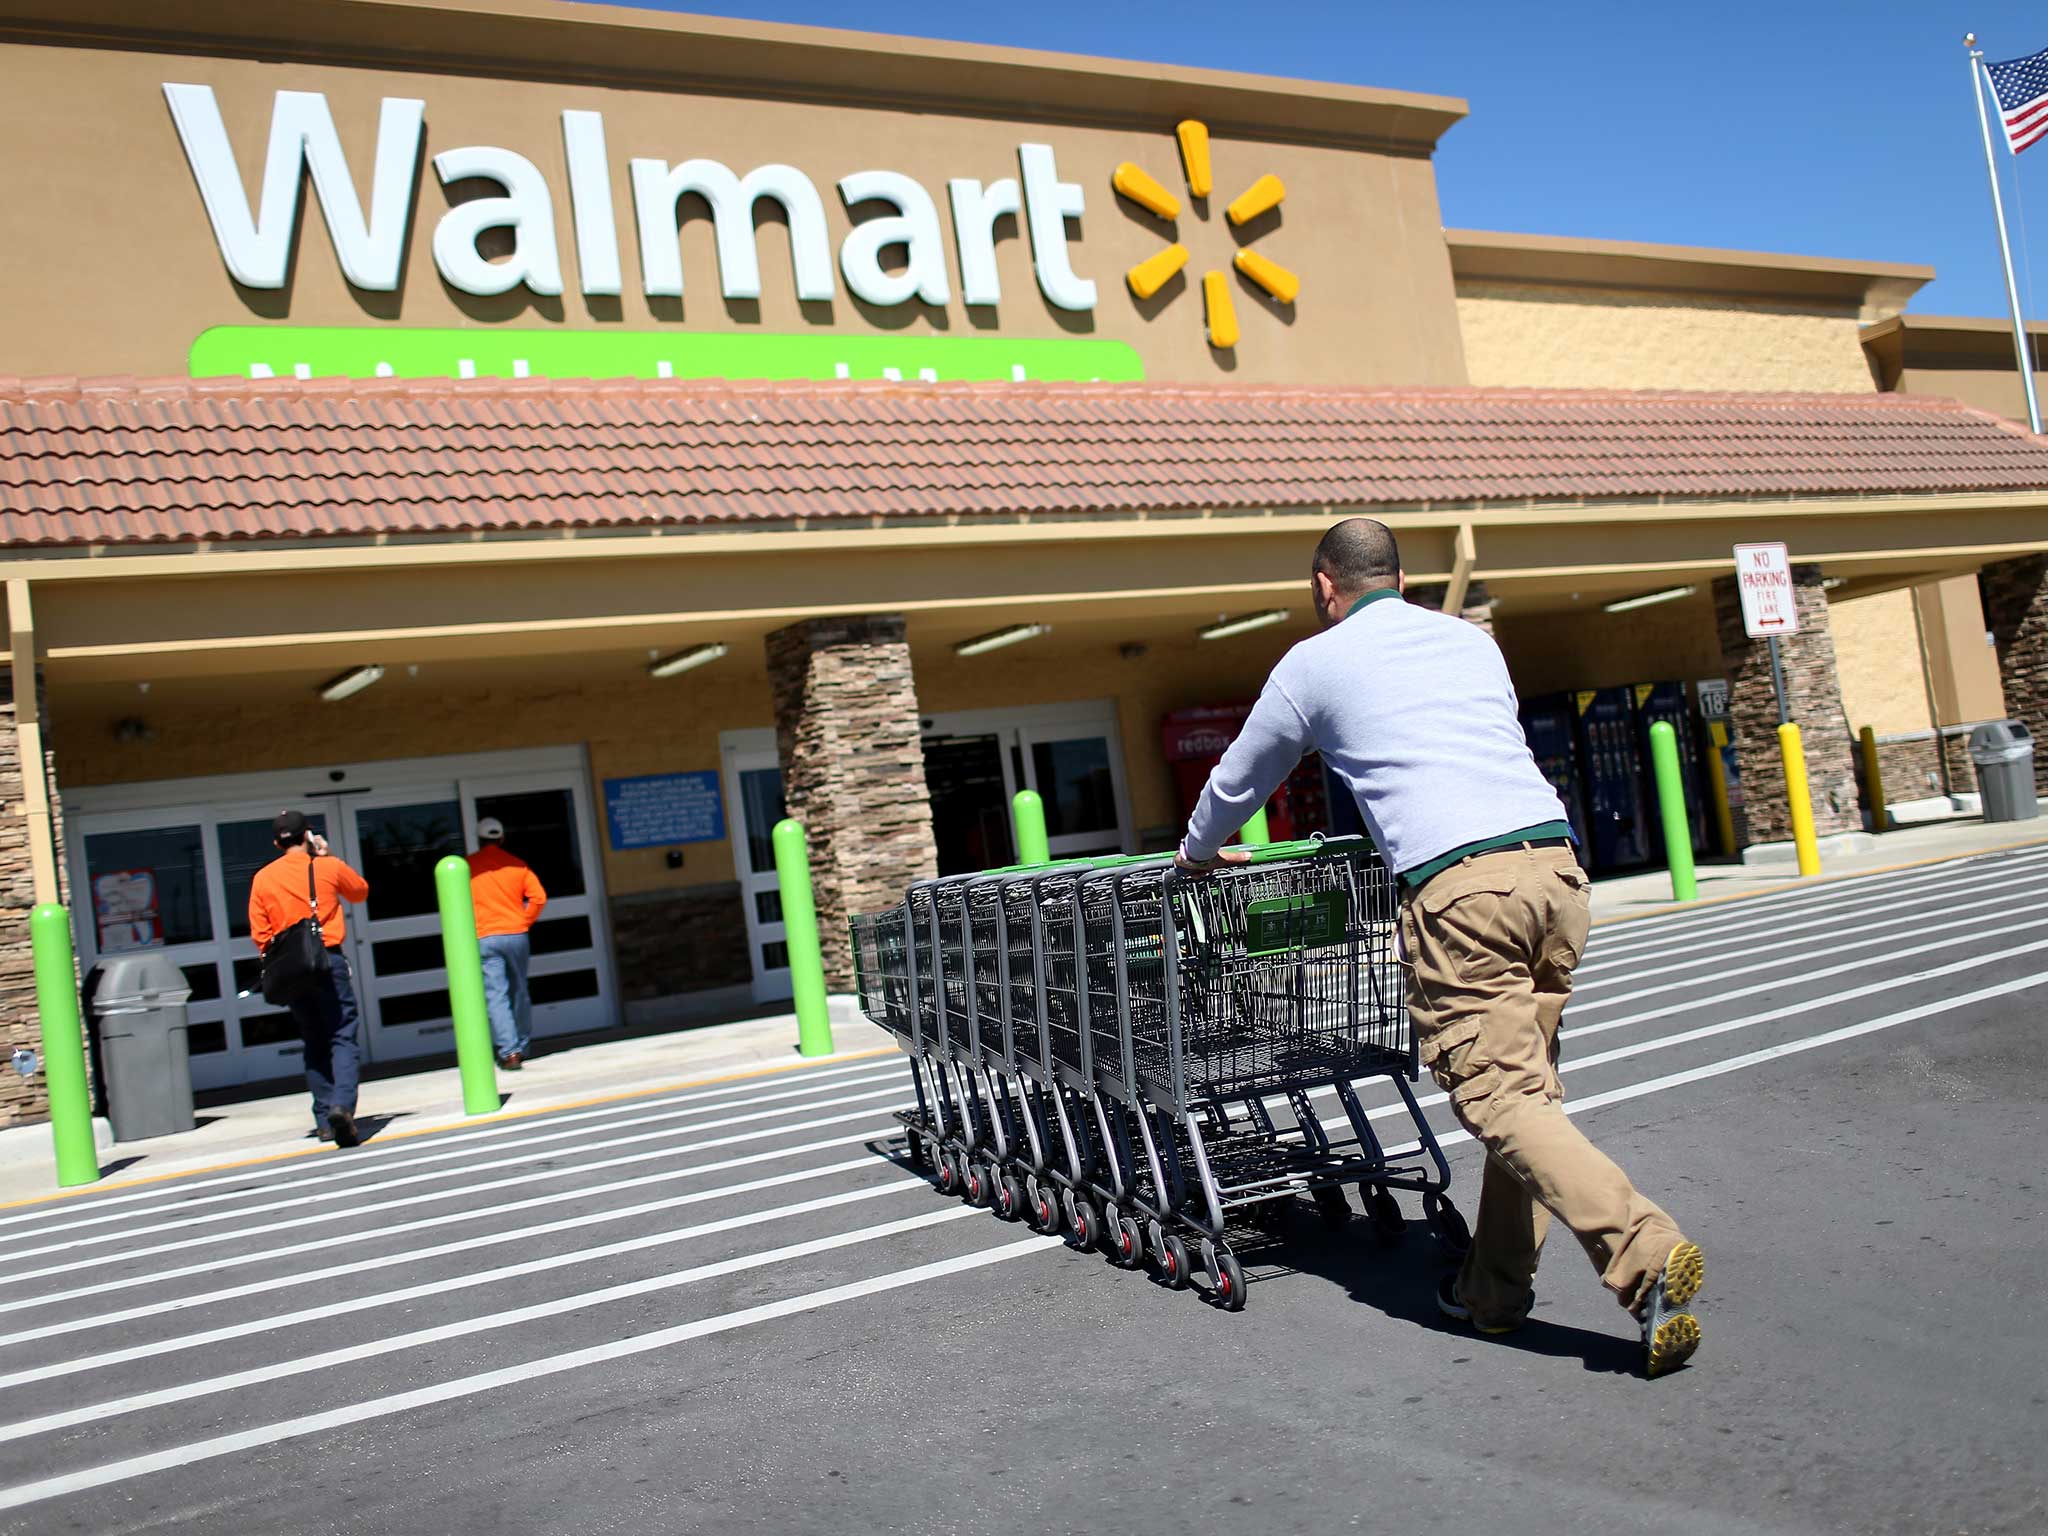 Walmart has said it will no longer stock confederacy flags or merchandise